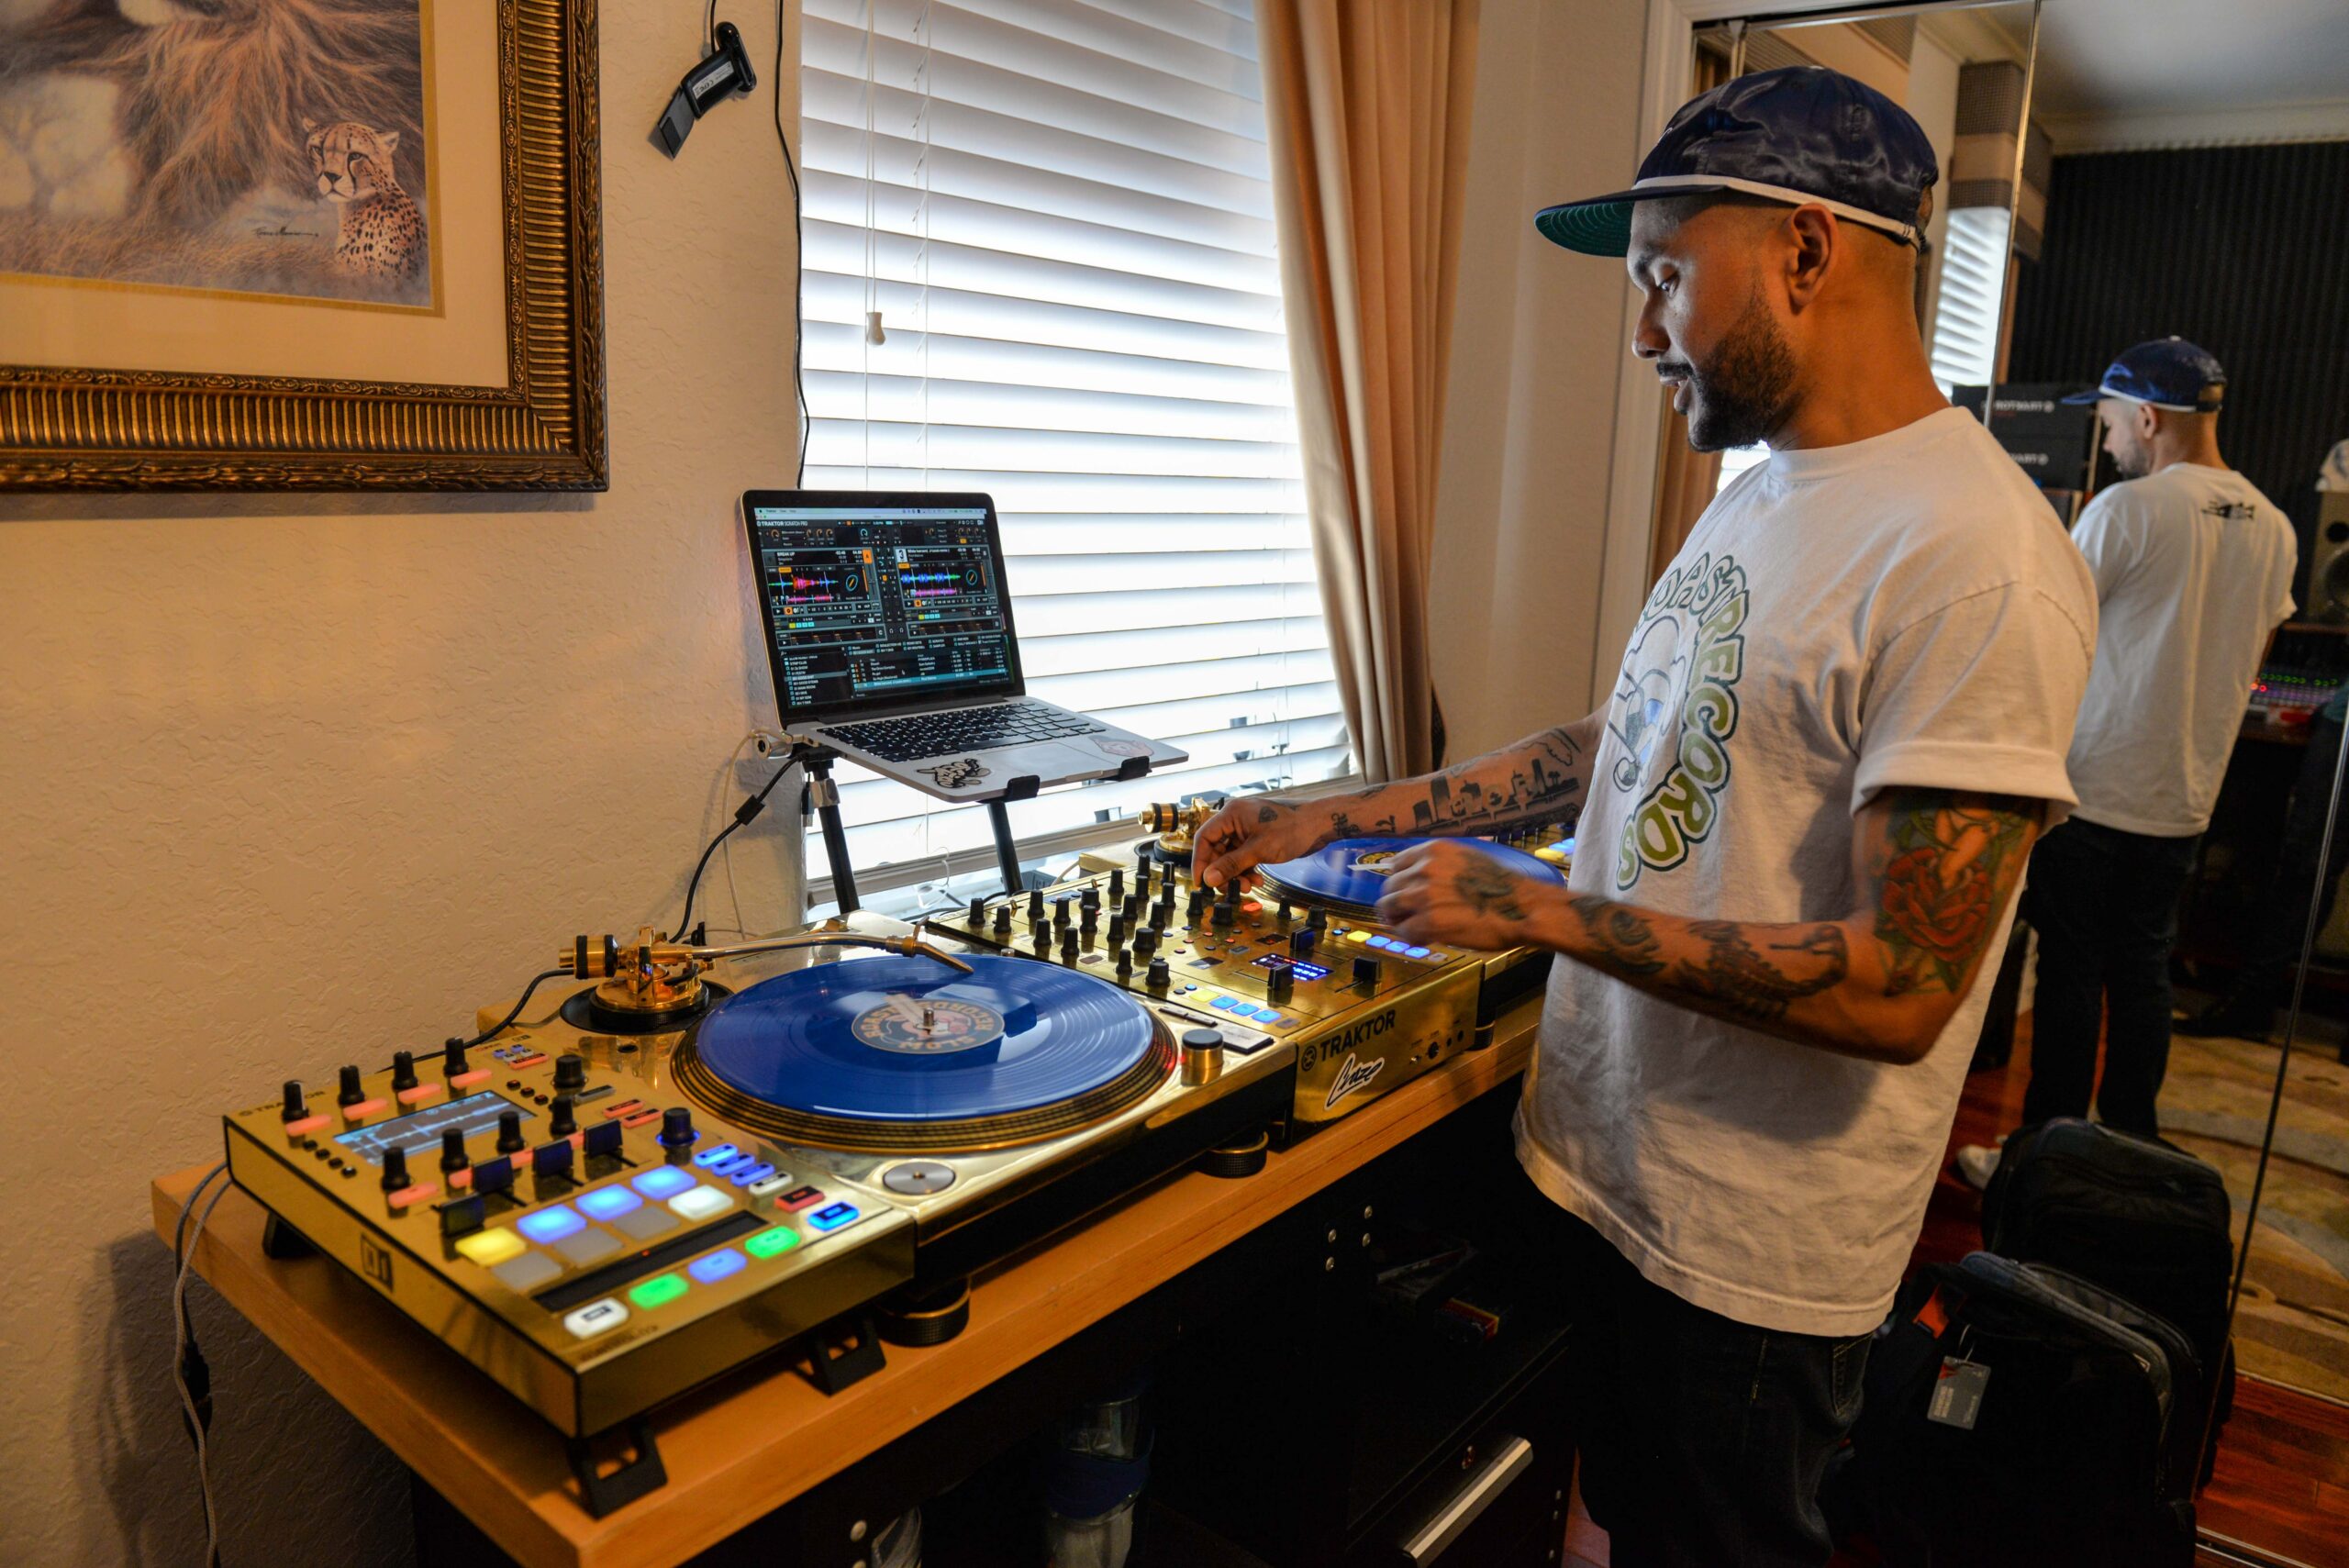 DJ Craze stands in front of his turntables with his hands on the switches in the middle.